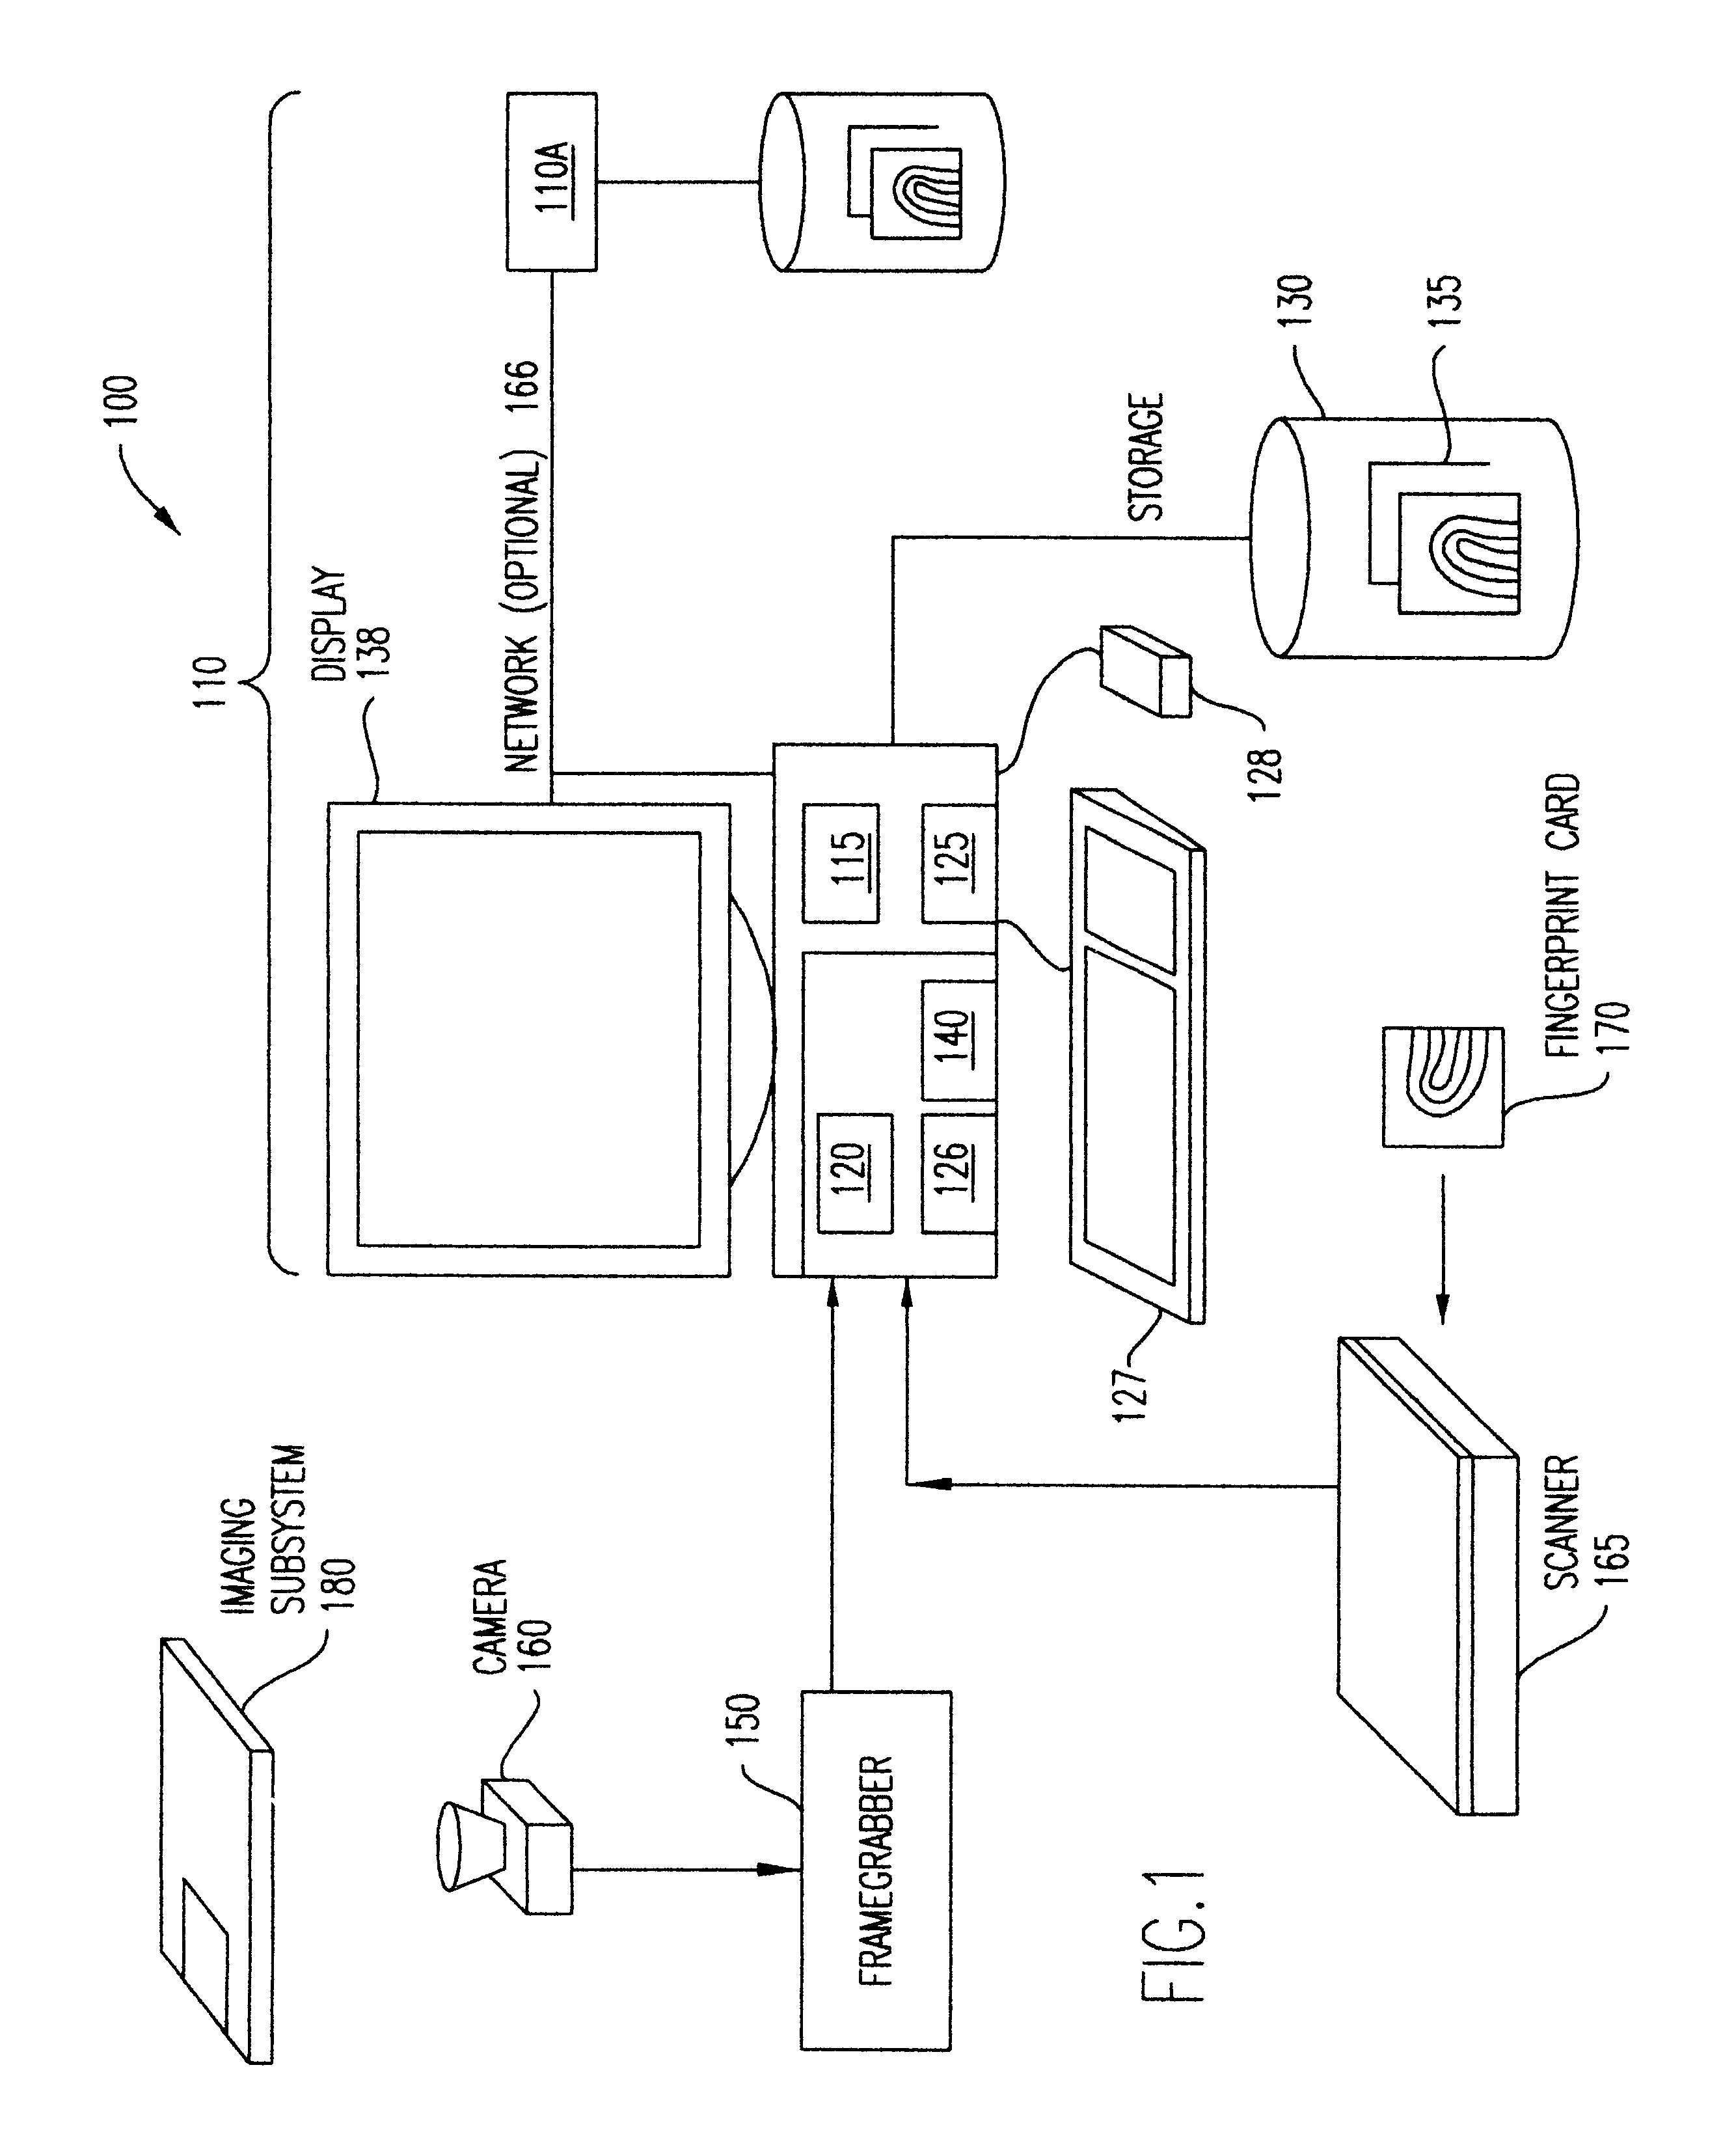 System and method for transforming fingerprints to improve recognition